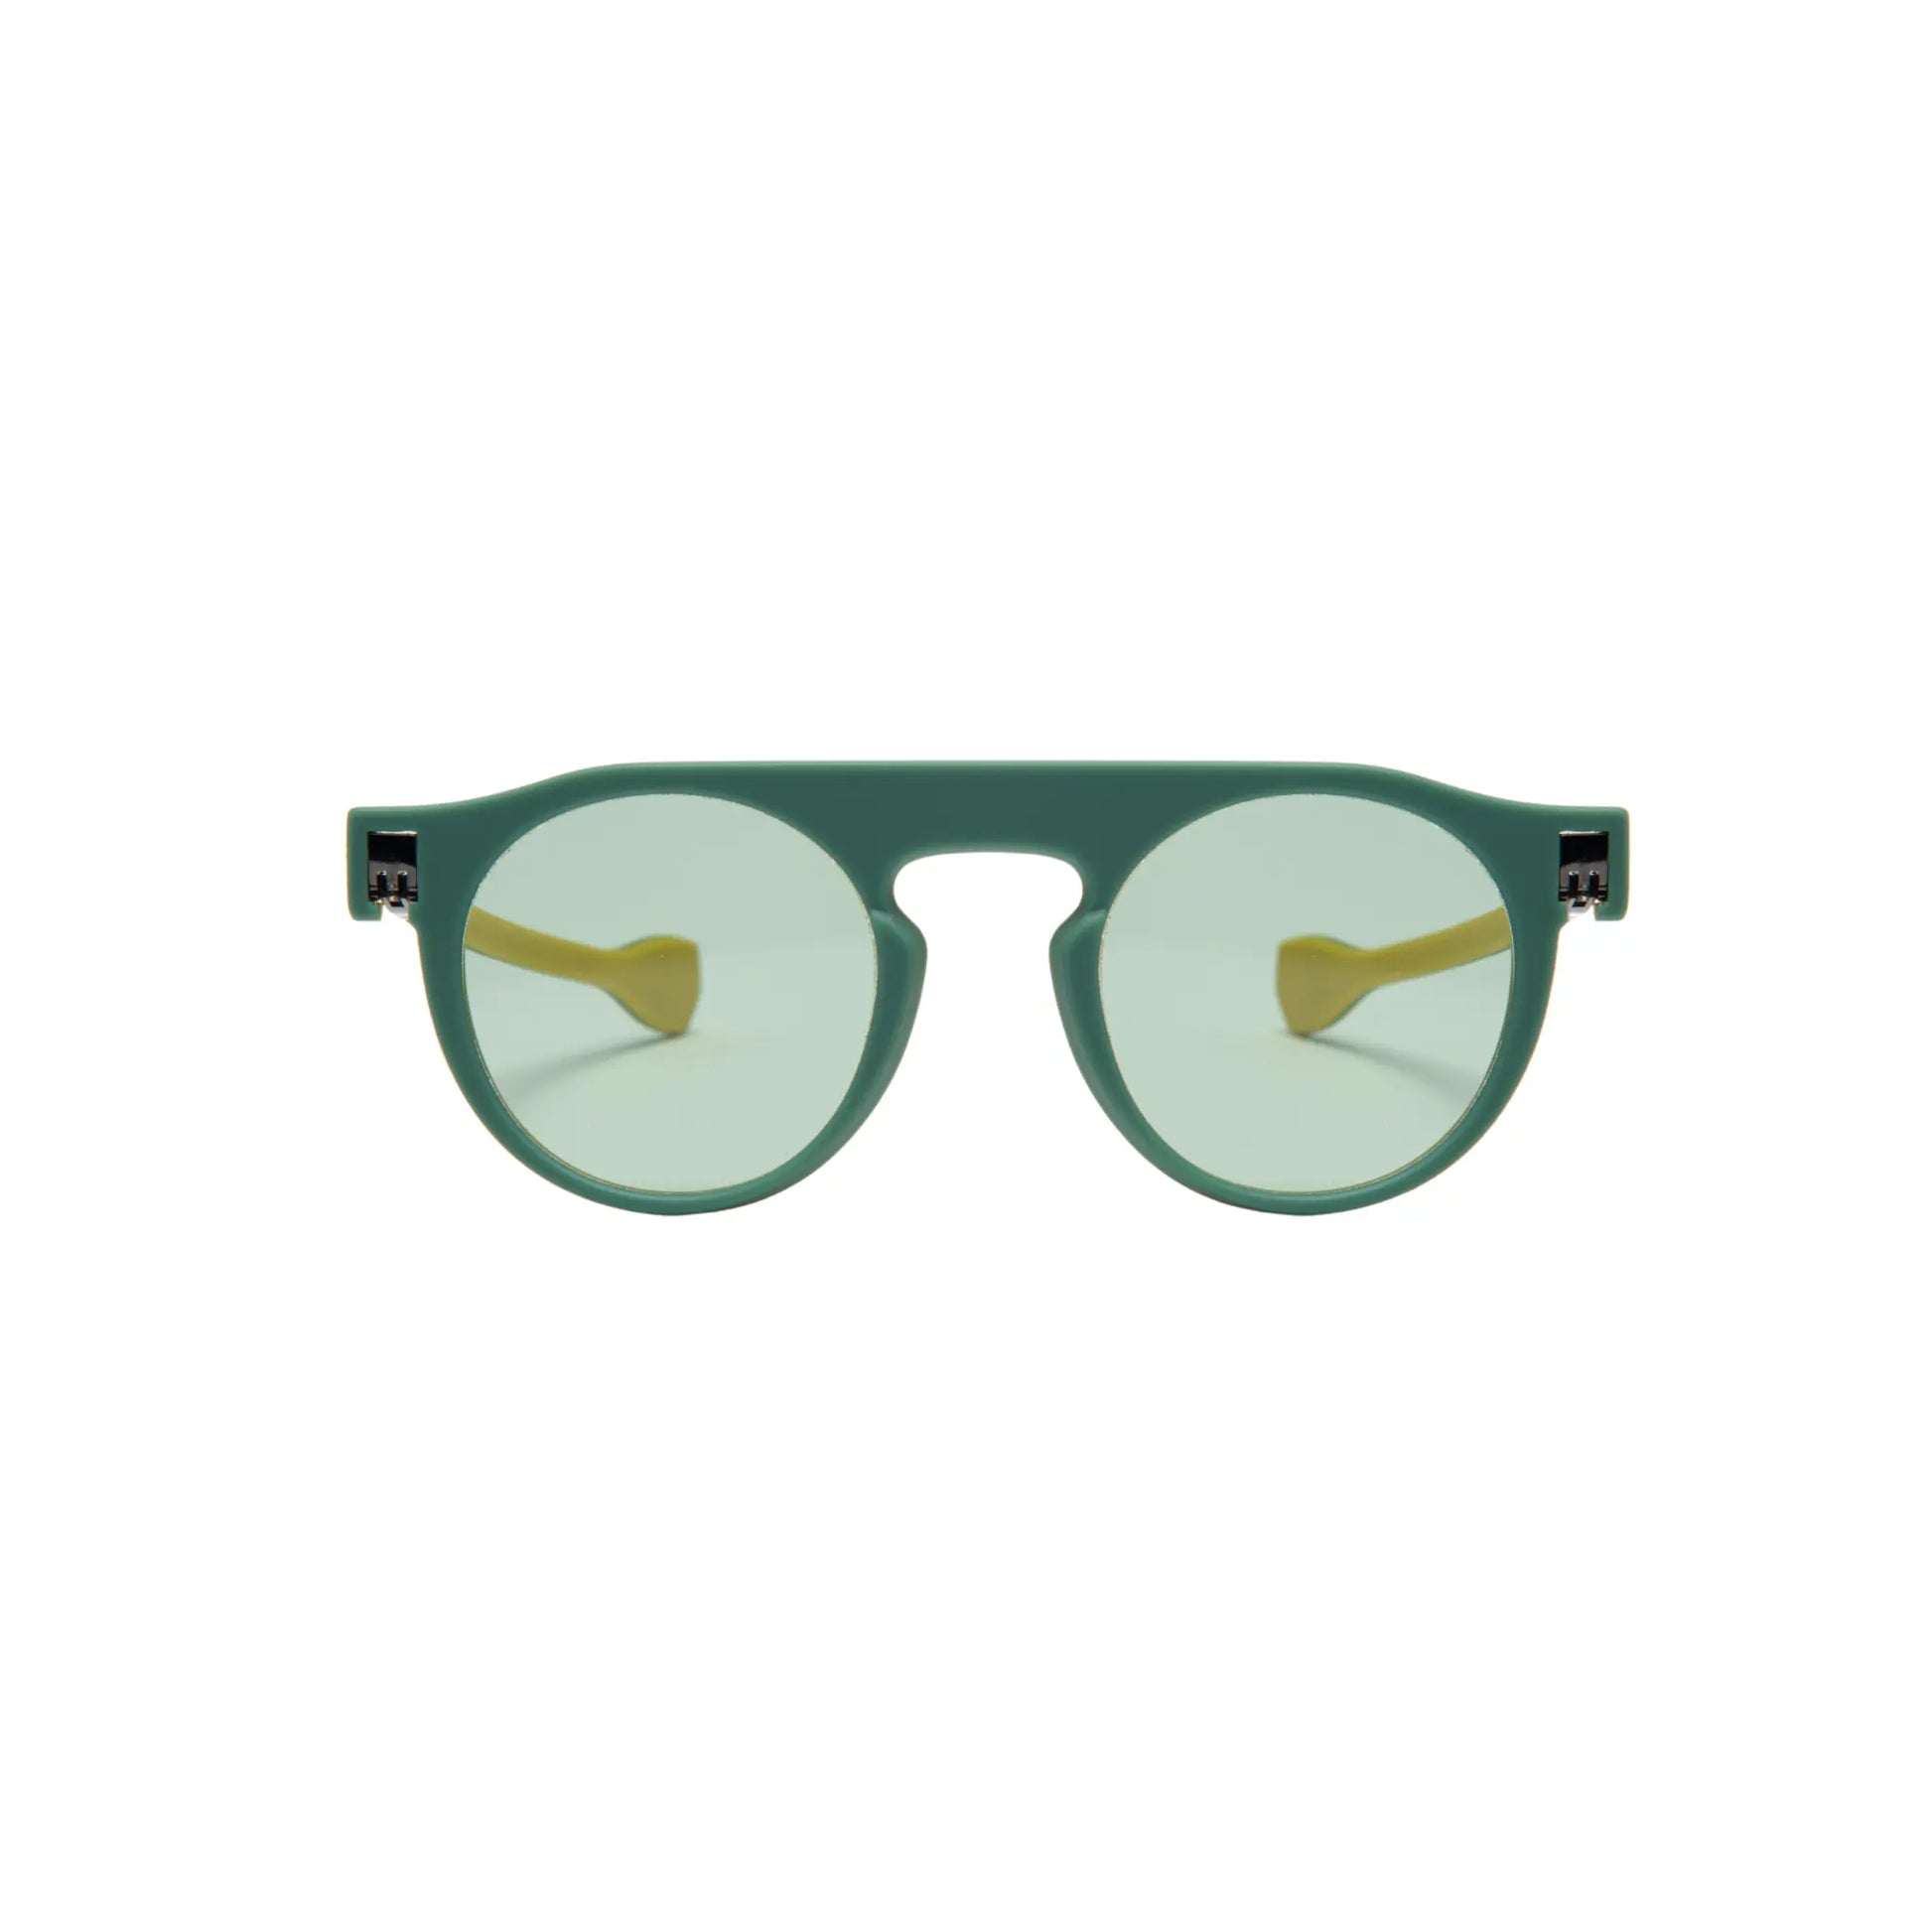 Reverso sunglasses green & yellow reversible & ultra light front view 2